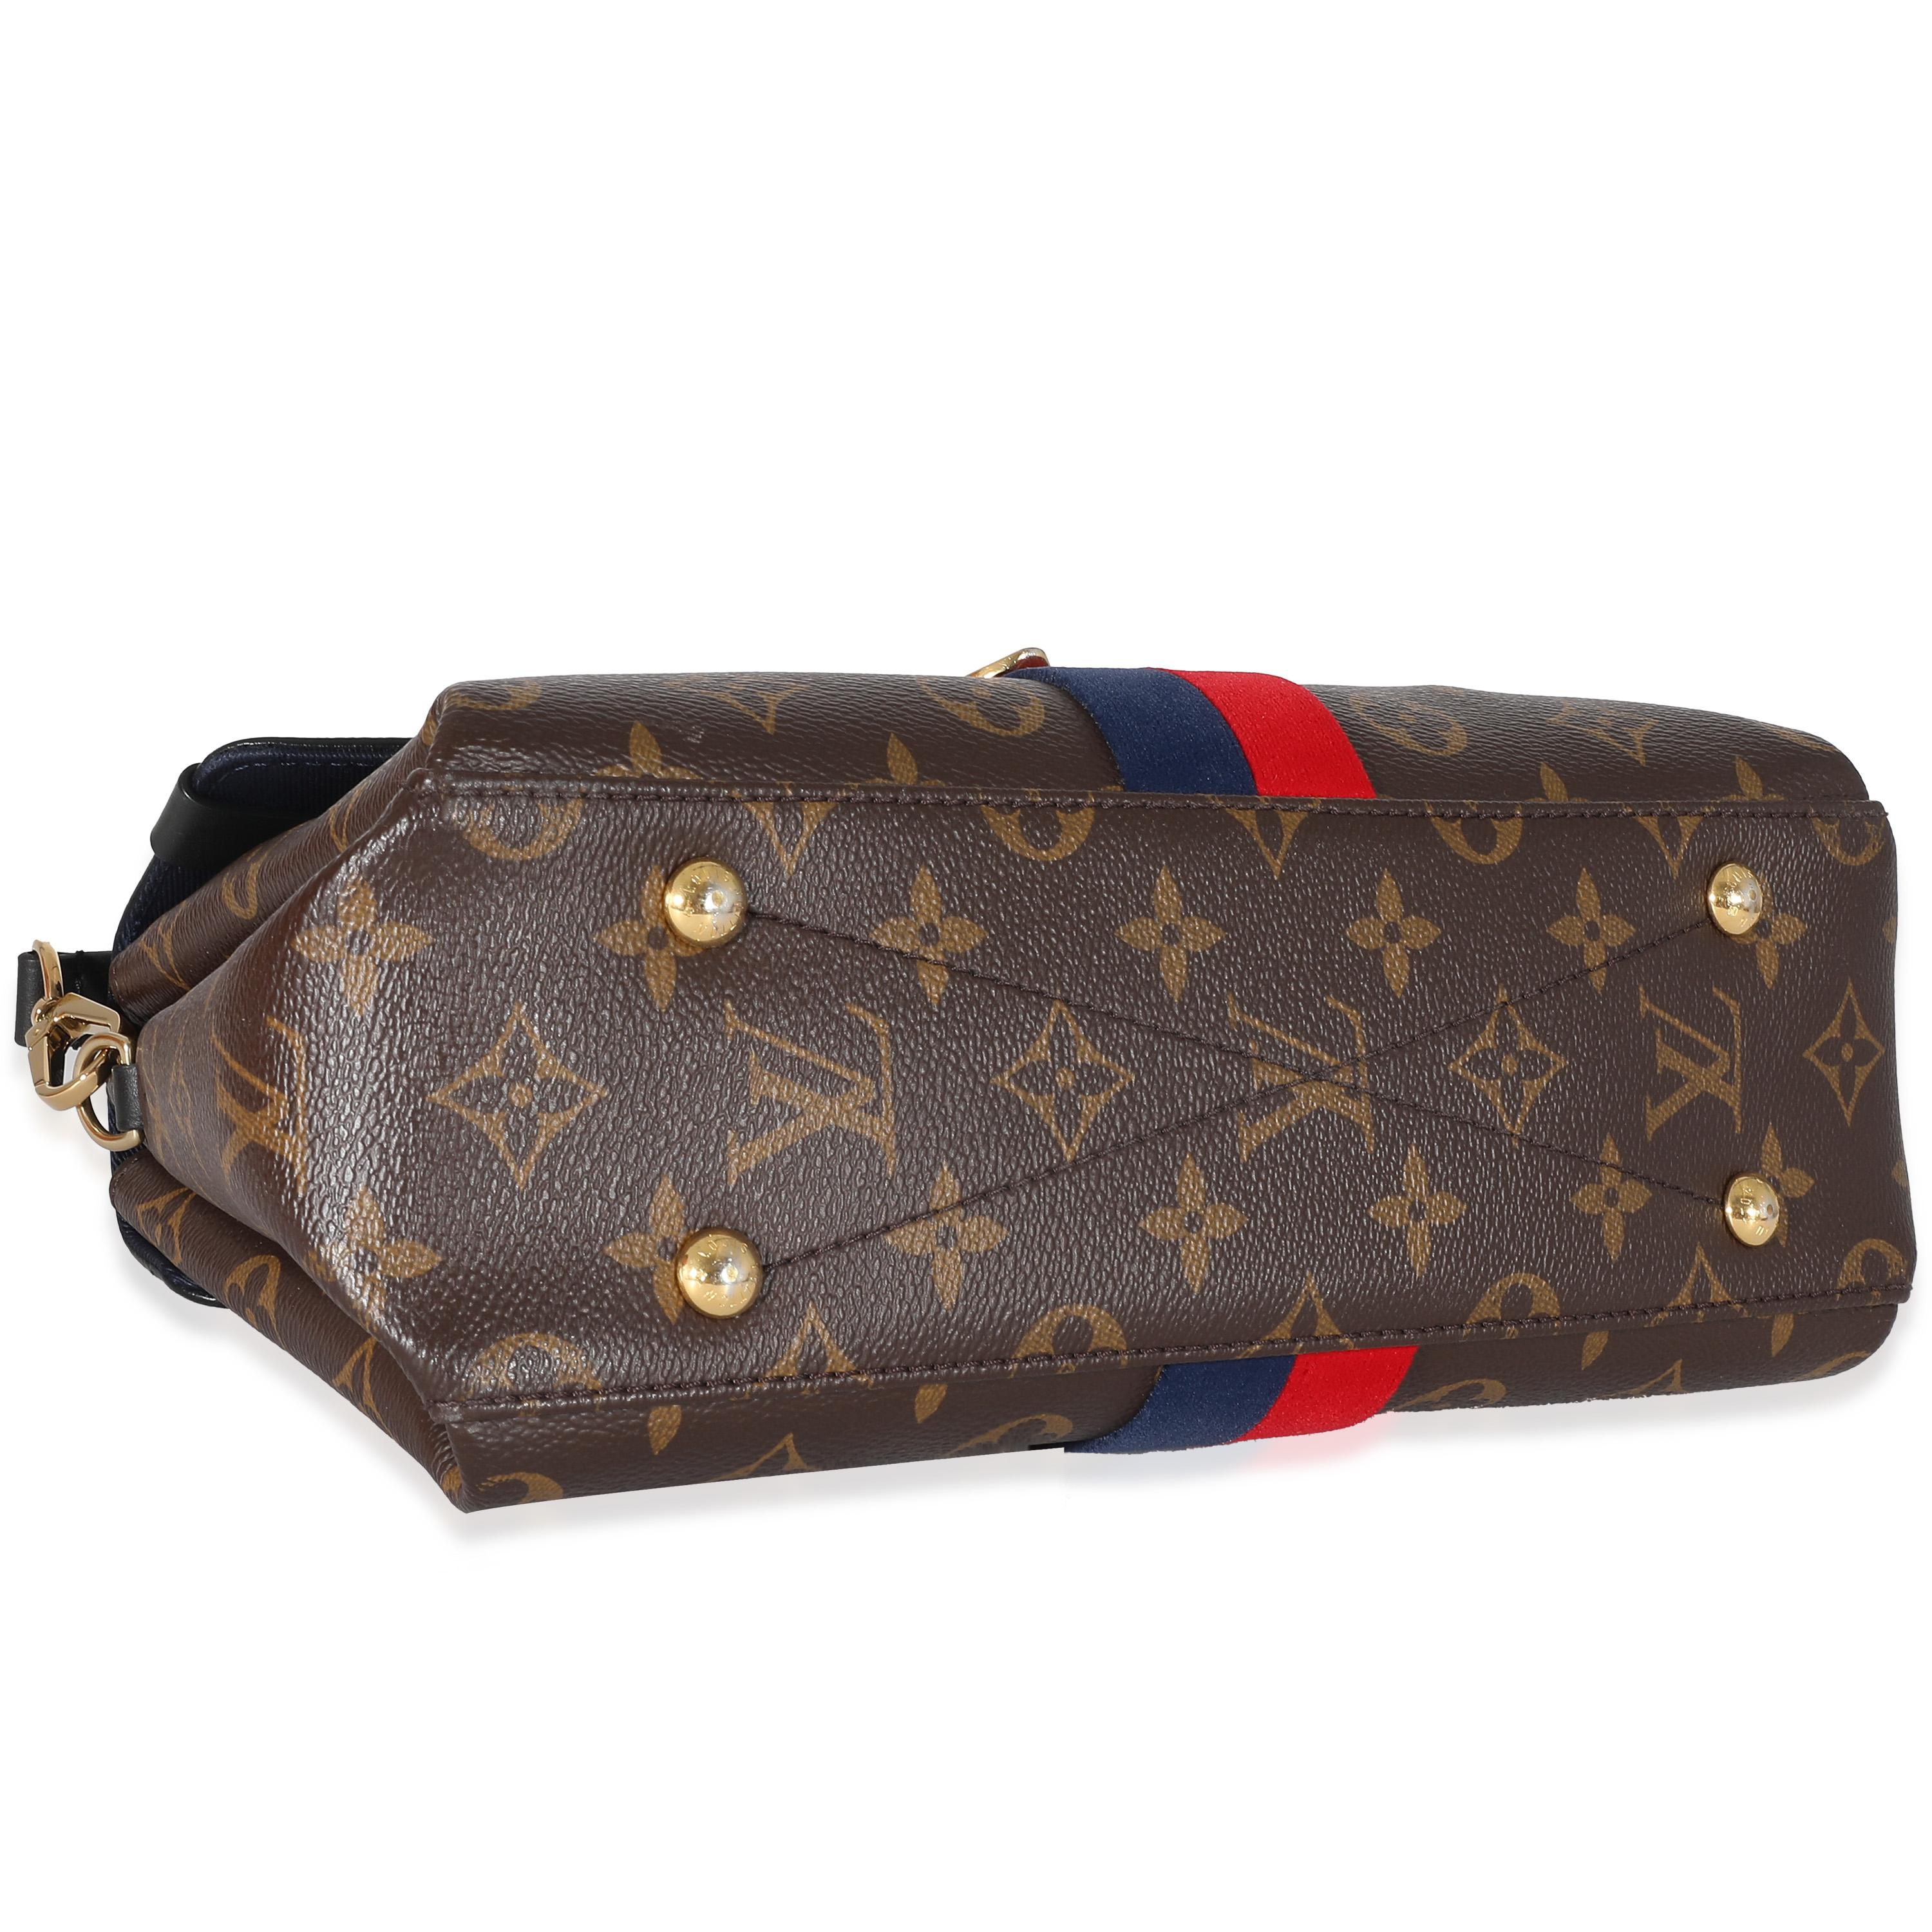 Listing Title: Louis Vuitton Monogram Canvas Georges BB
SKU: 133496
Condition: Pre-owned 
Handbag Condition: Good
Condition Comments: Item is in good condition with apparent signs of wear. Wear to front leather tabs and minor splitting to leather